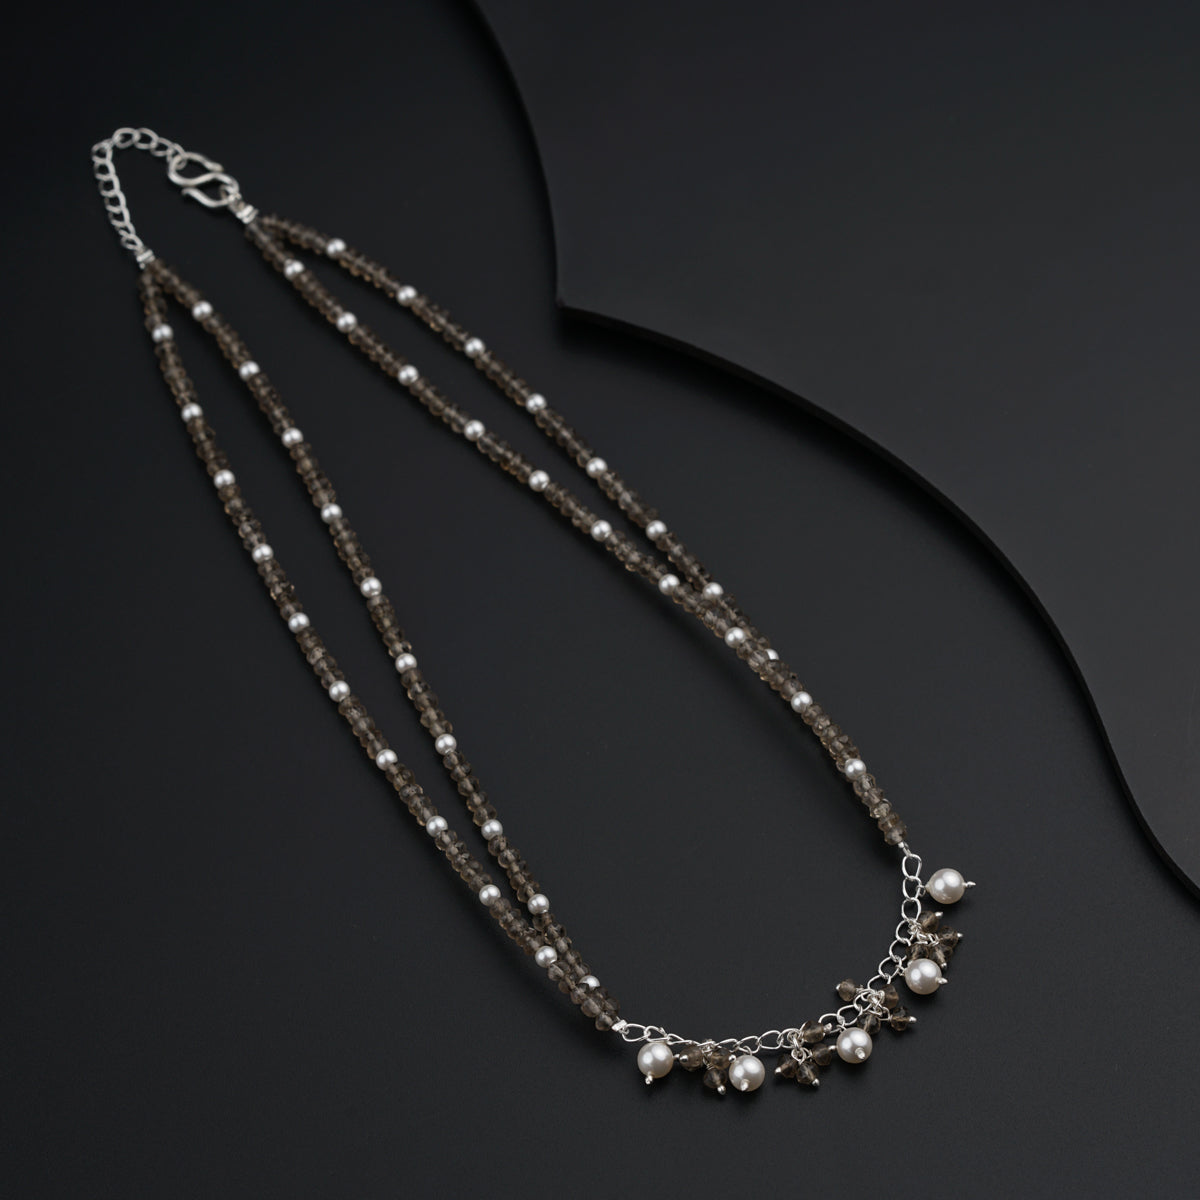 a long necklace with pearls and beads on a black surface